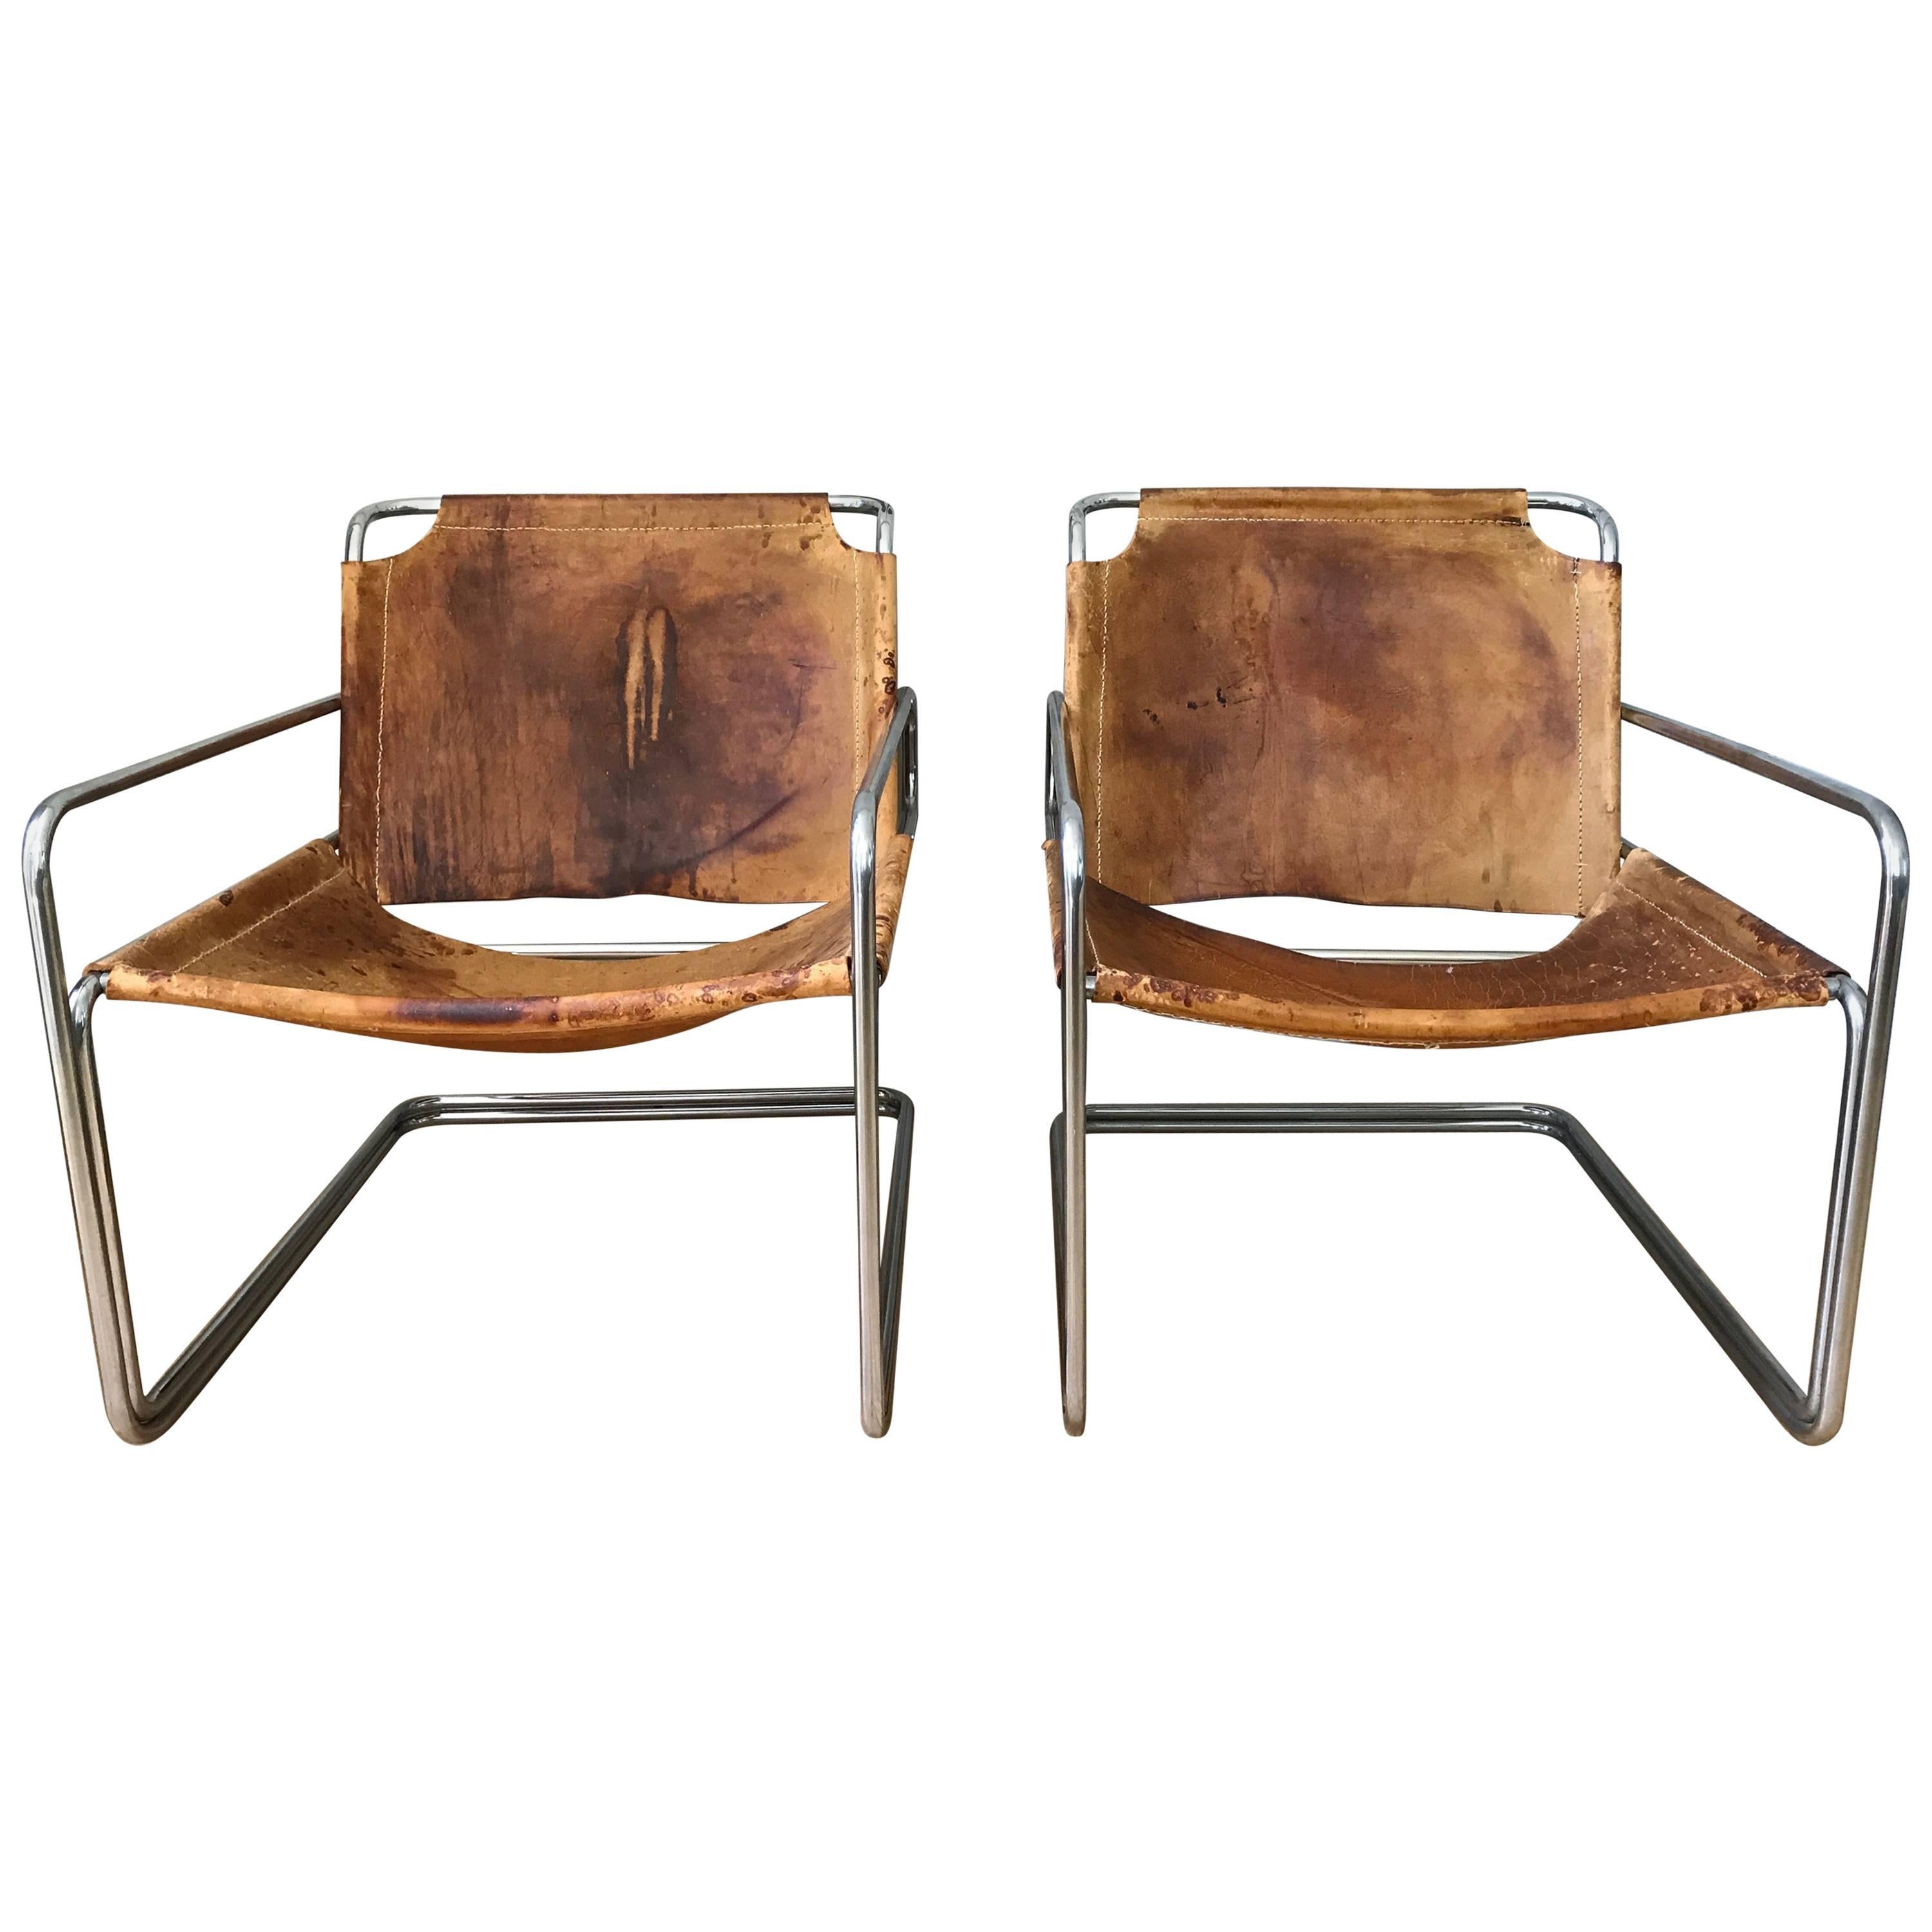 Pair of French Leather and Chrome Mid-Century Sling Chairs